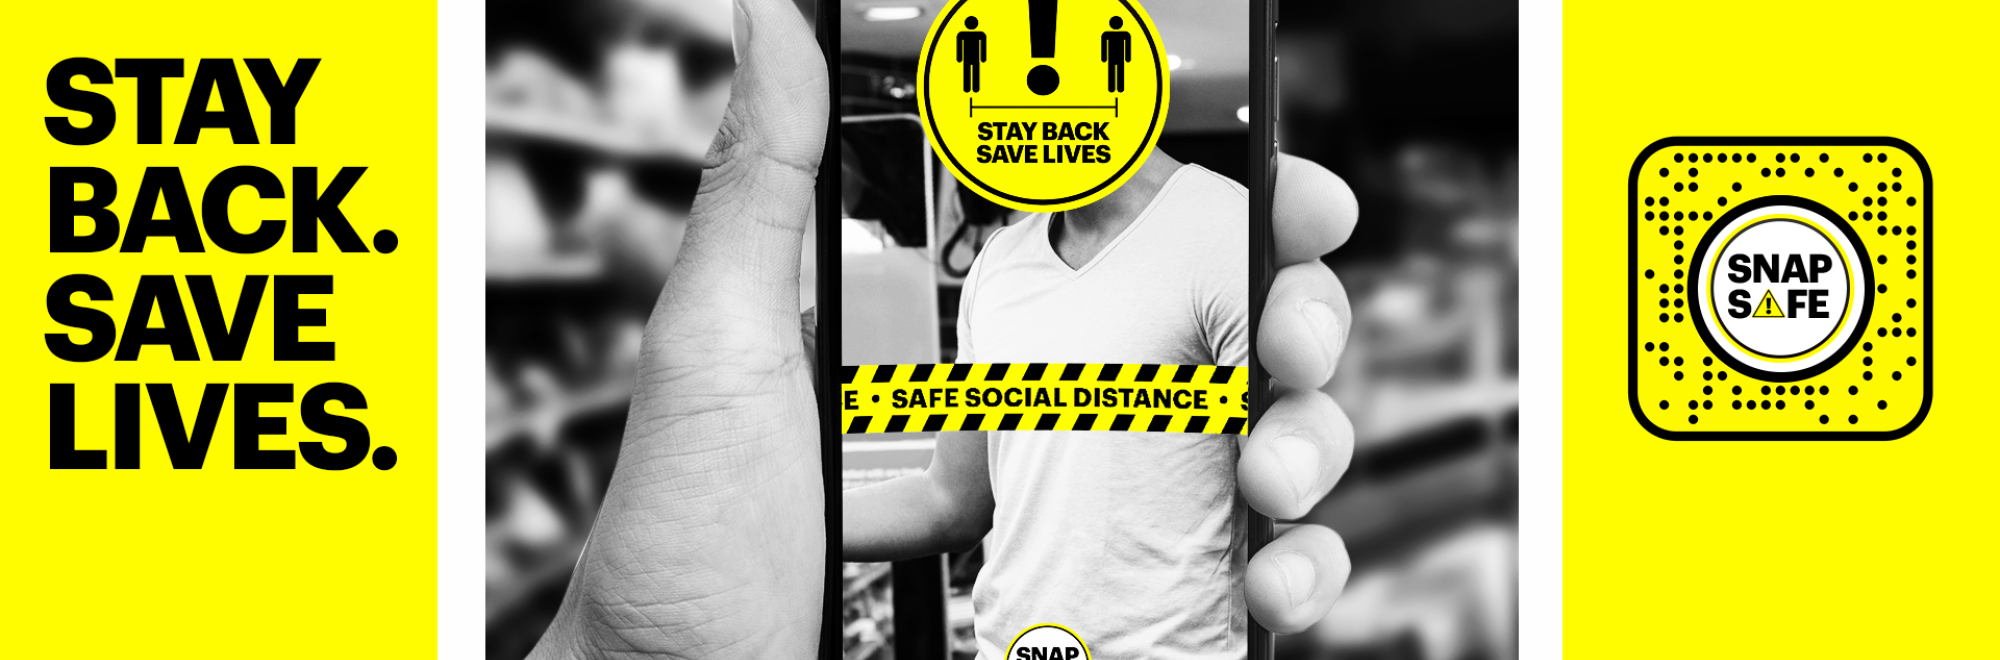 Keep your distance with the new 'Snap Safe' app from We Are Social